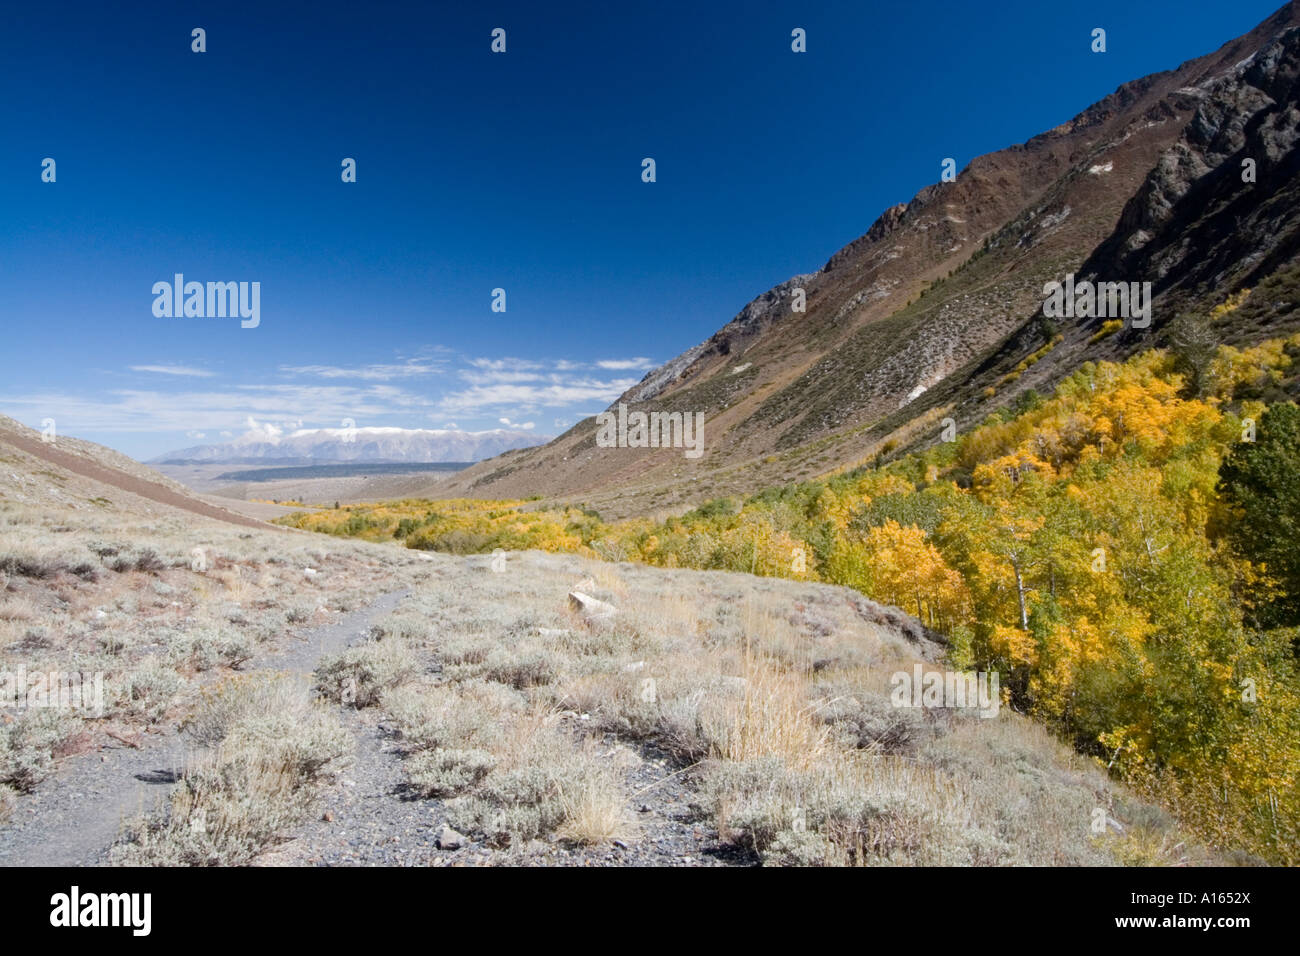 Digital stock image of fall foliage and mountains at McGee Creek Canyon in eastern Sierra Nevada mountains Stock Photo